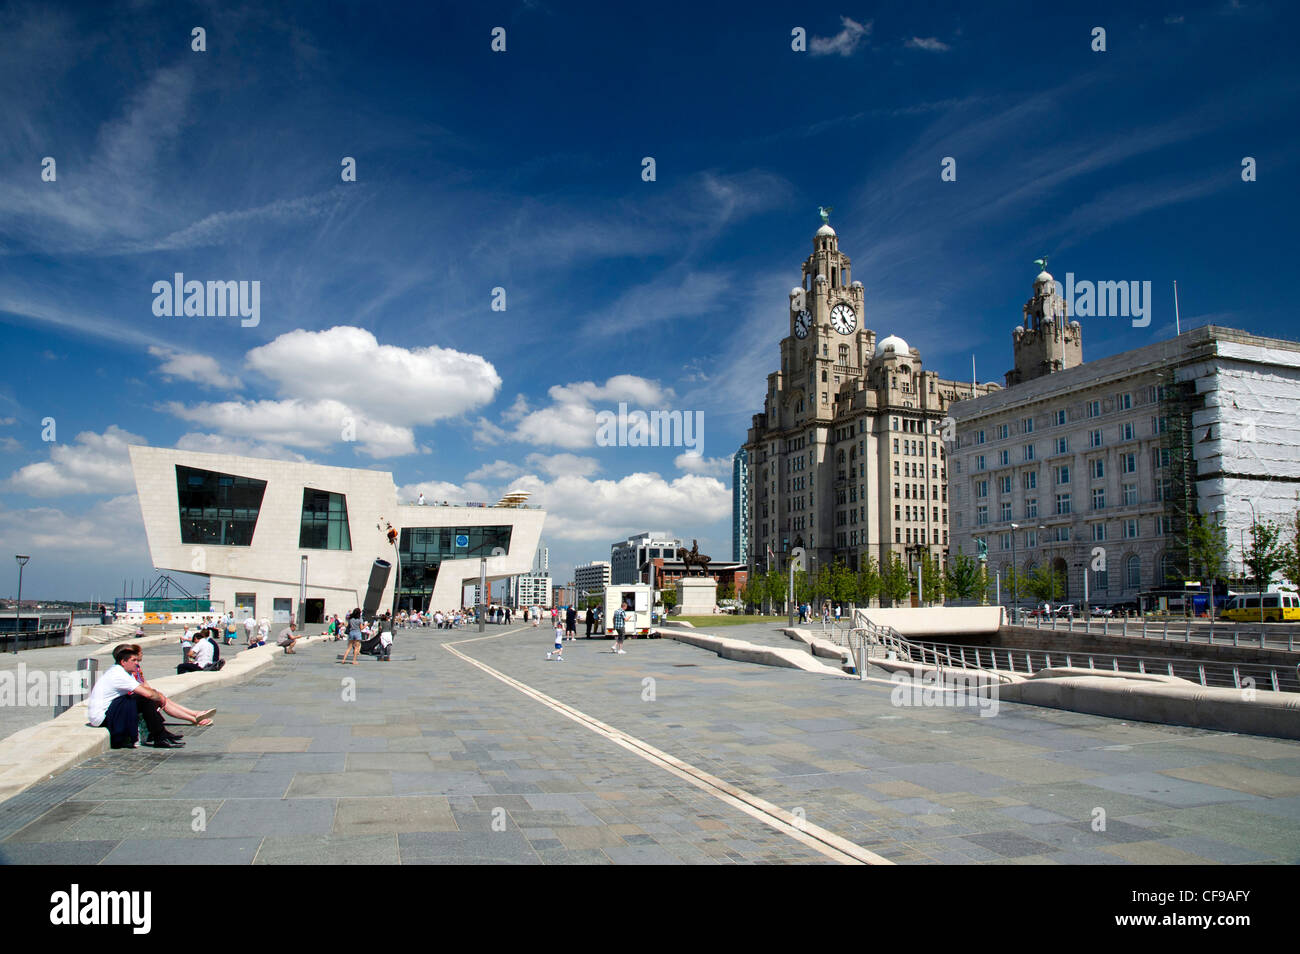 The Three Graces Royal Liver Building Cunard Building Mersey Docks and Harbour Board UNESCO world heritage site. Stock Photo